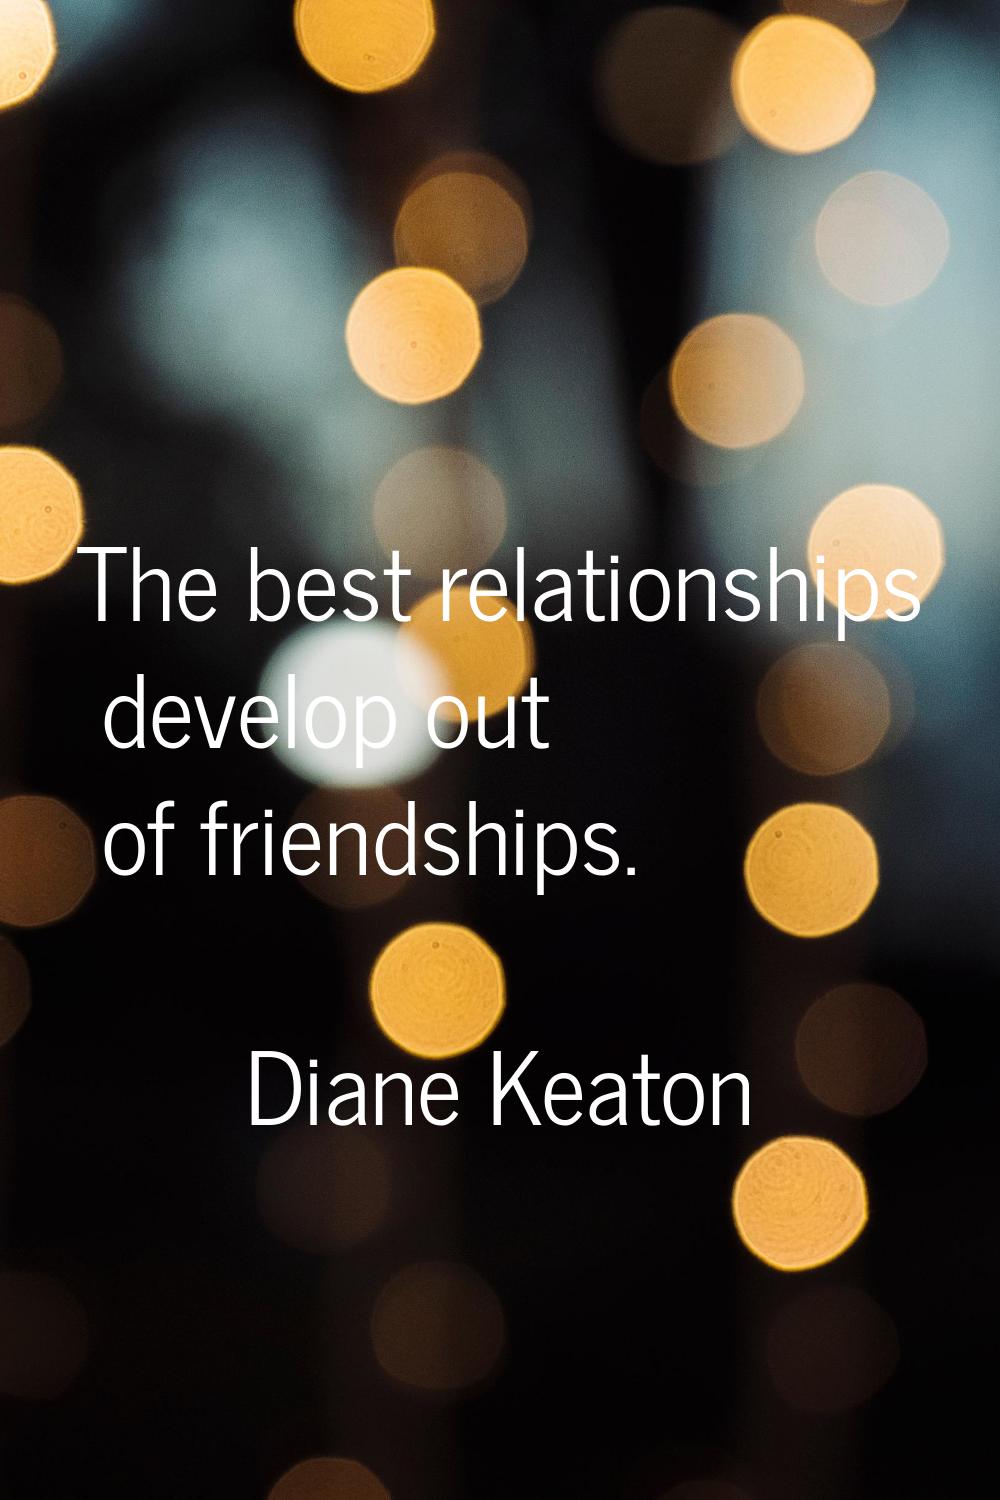 The best relationships develop out of friendships.